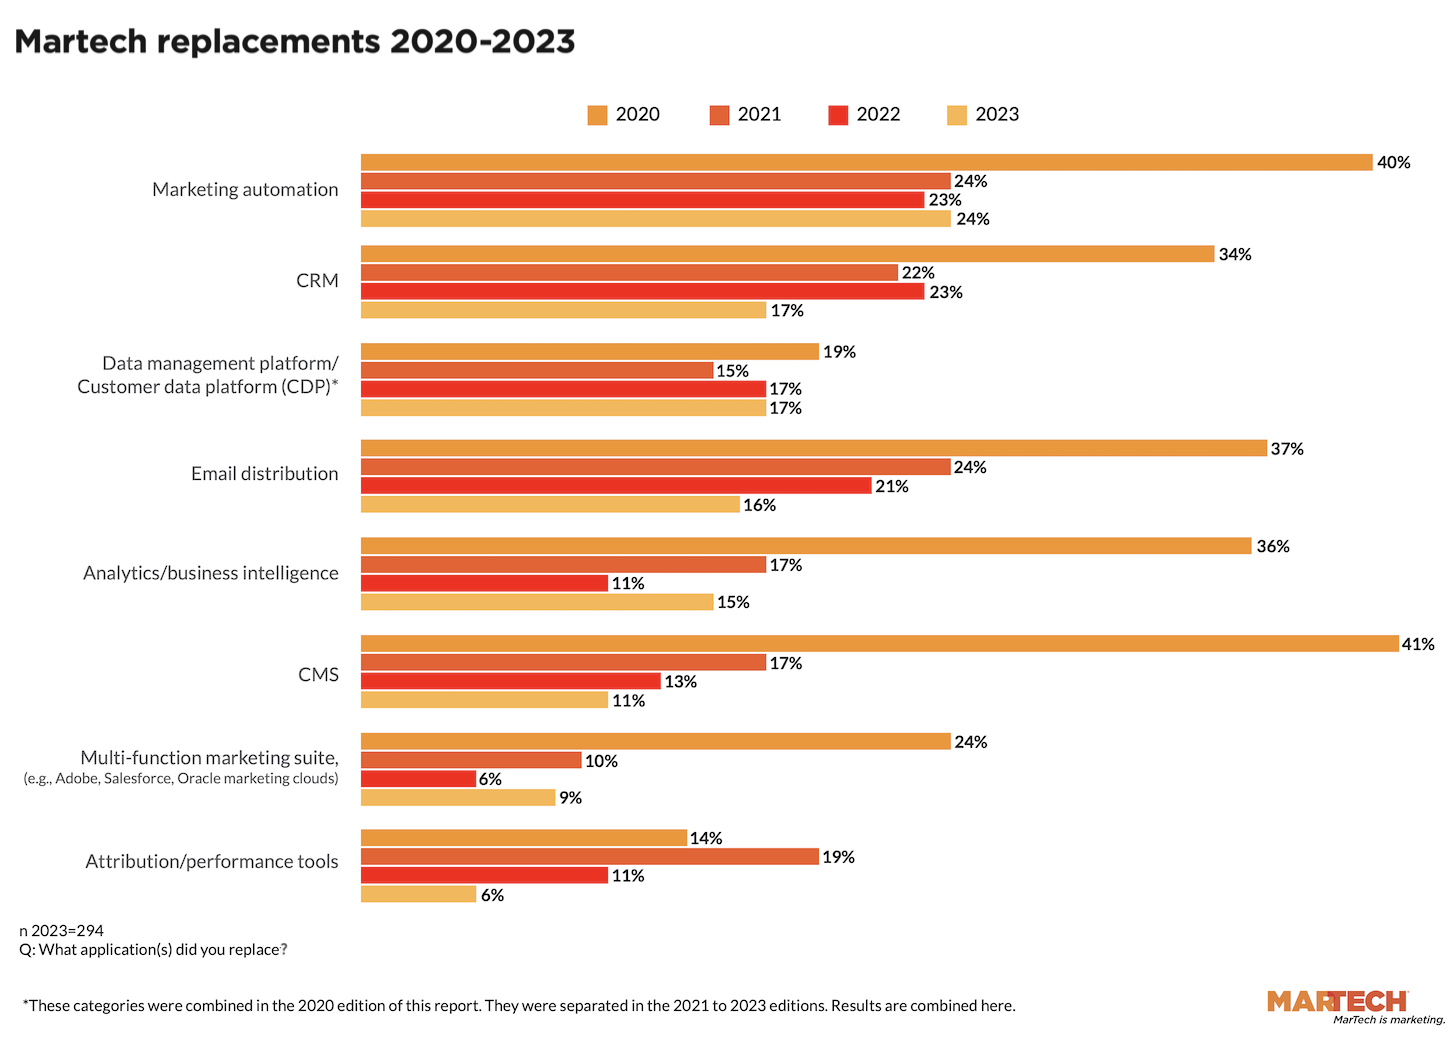 Martech Replacements 2020-2023